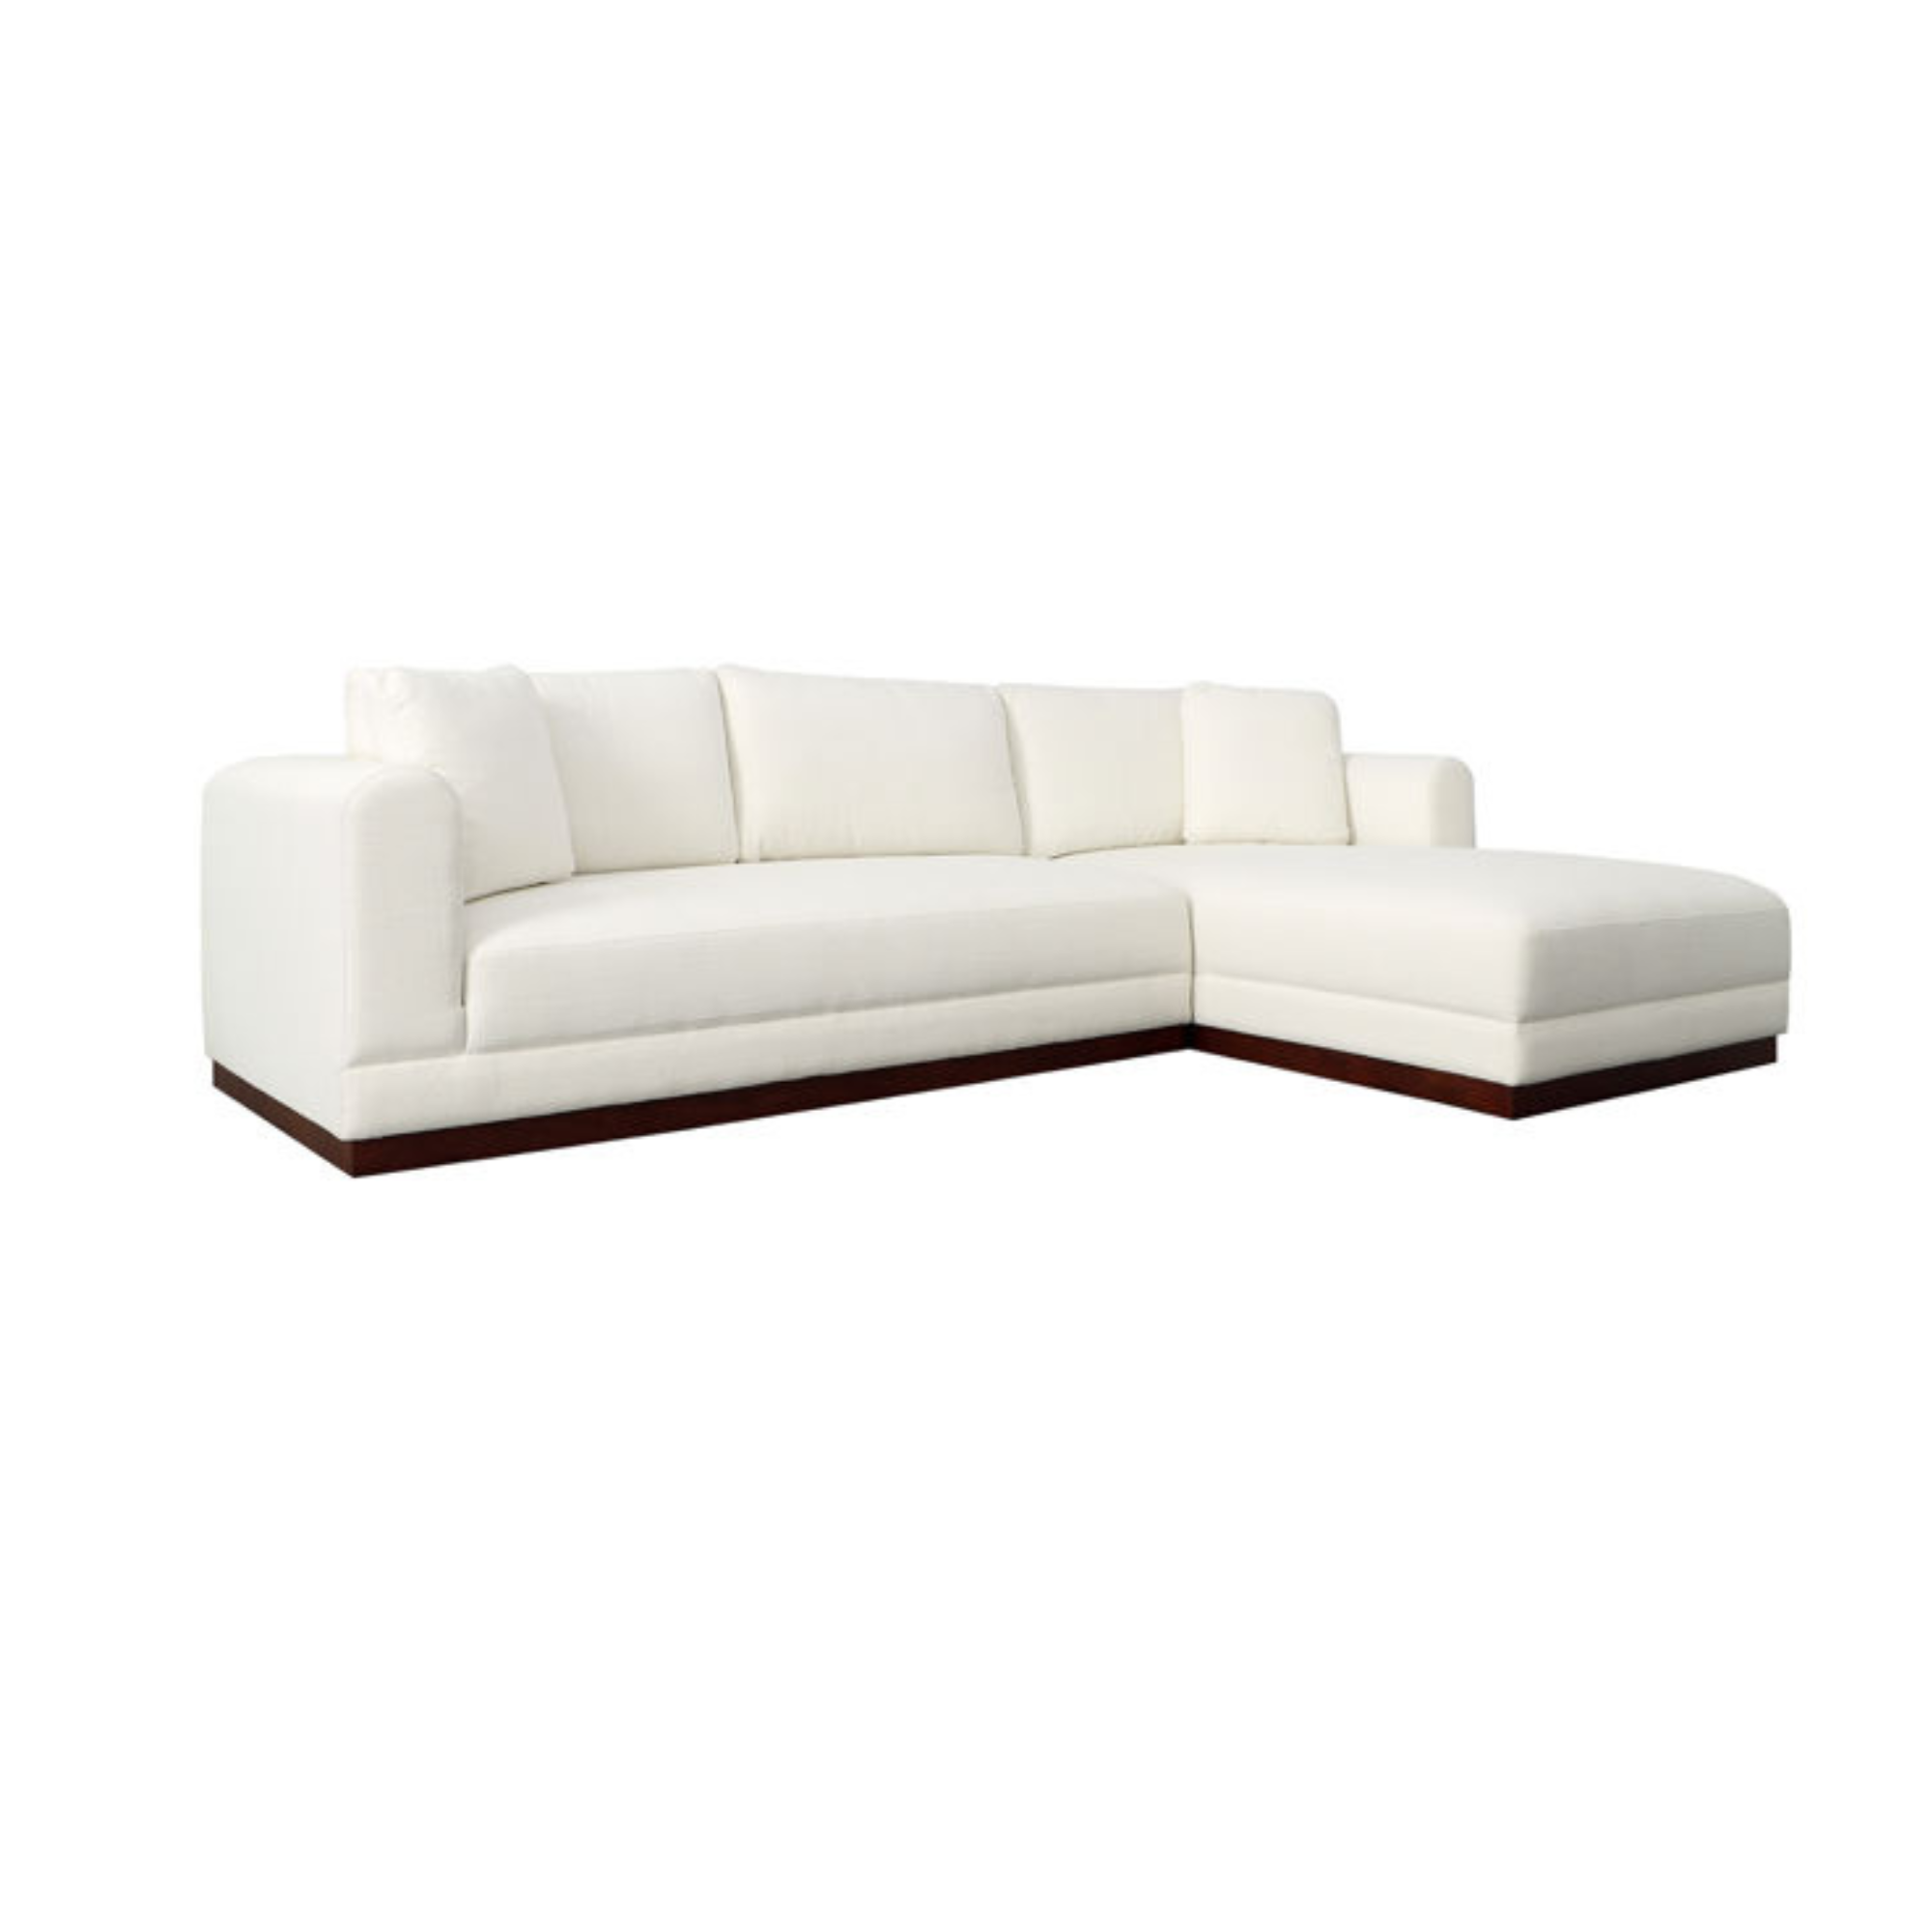 Betina Chaise Sectional